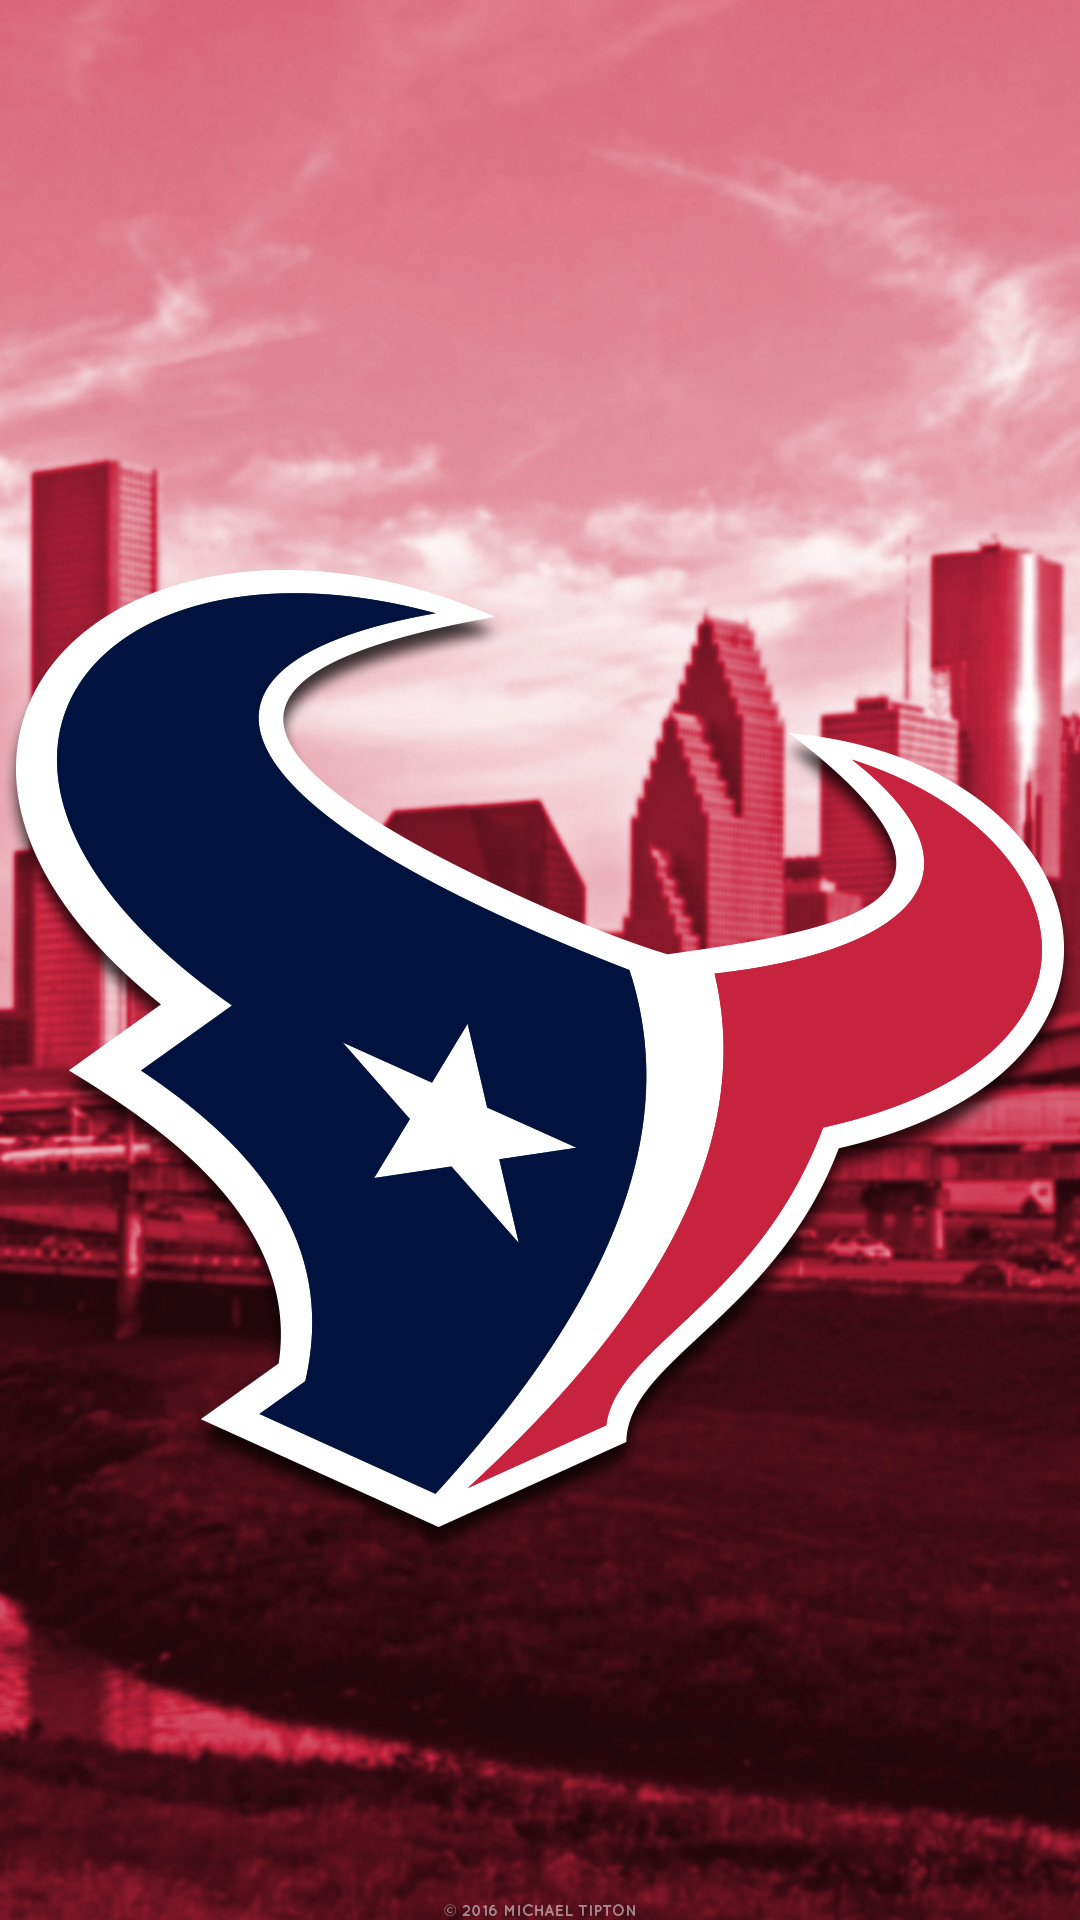 houston texans wallpapers 2015 wallpaper cave on houston texans wallpaper